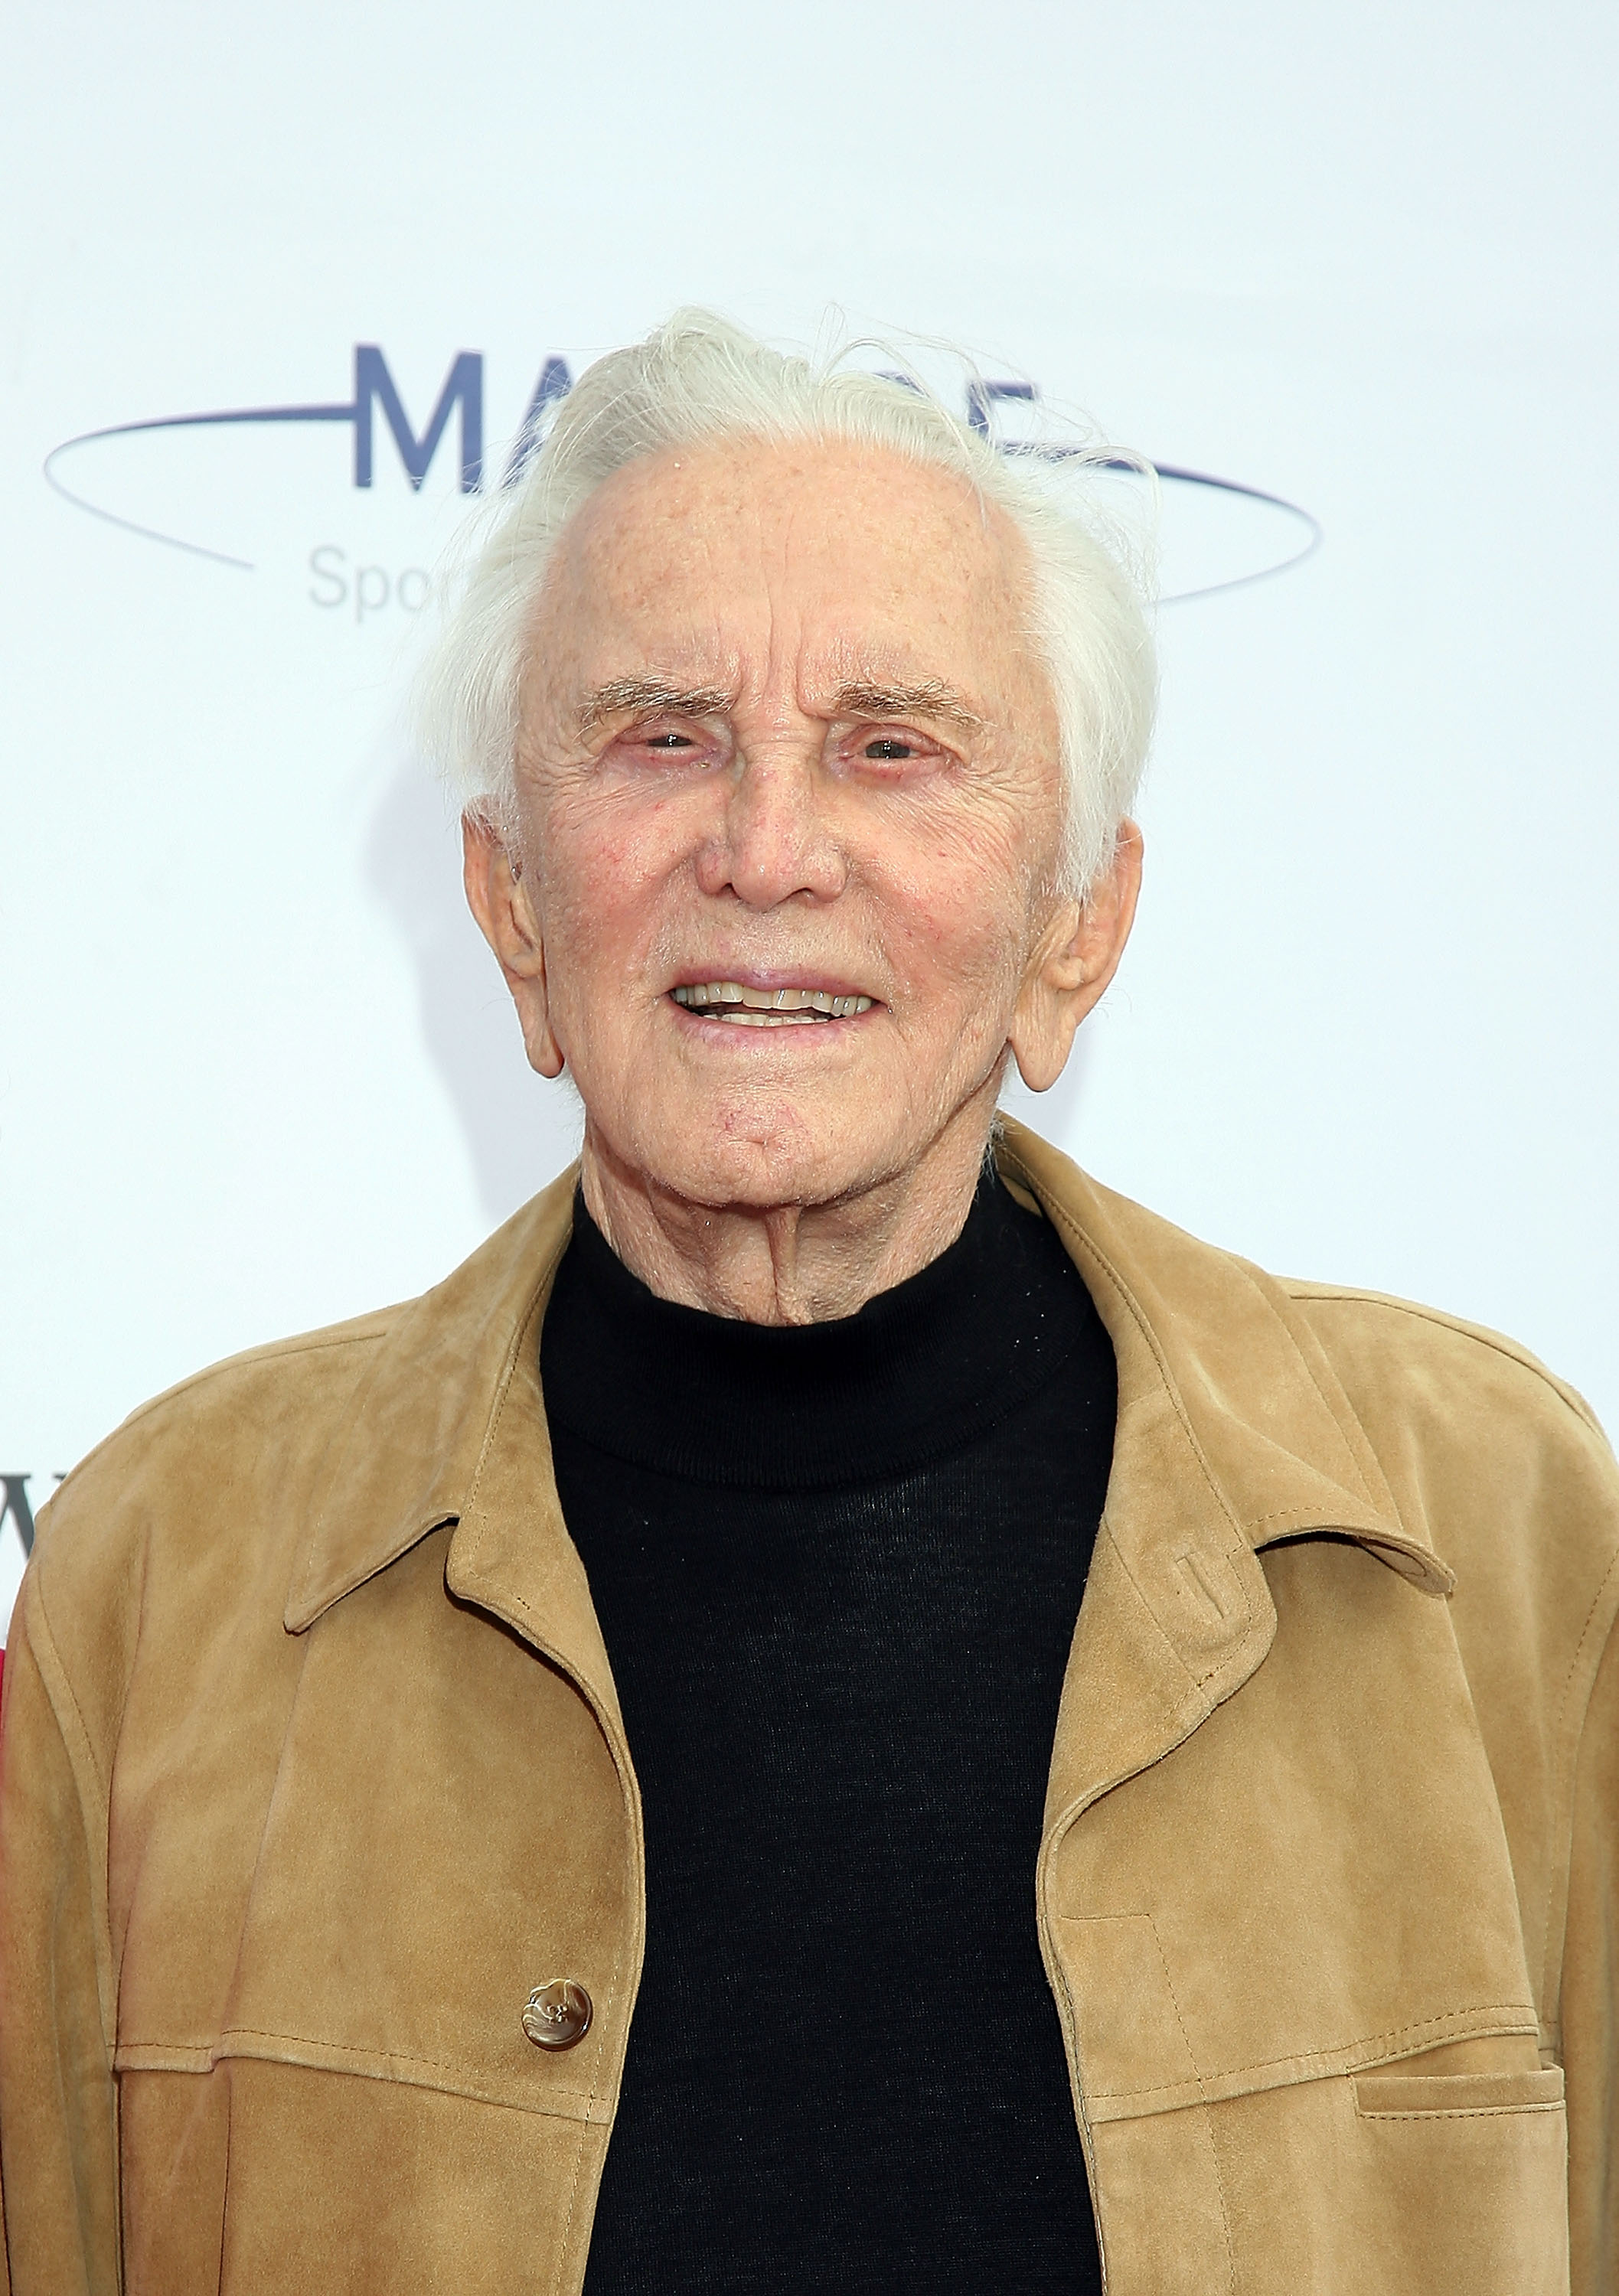  Kirk Douglas attends the 2nd Annual "High Flying Fundraiser" October 4, 2008 | Photo: GettyImages